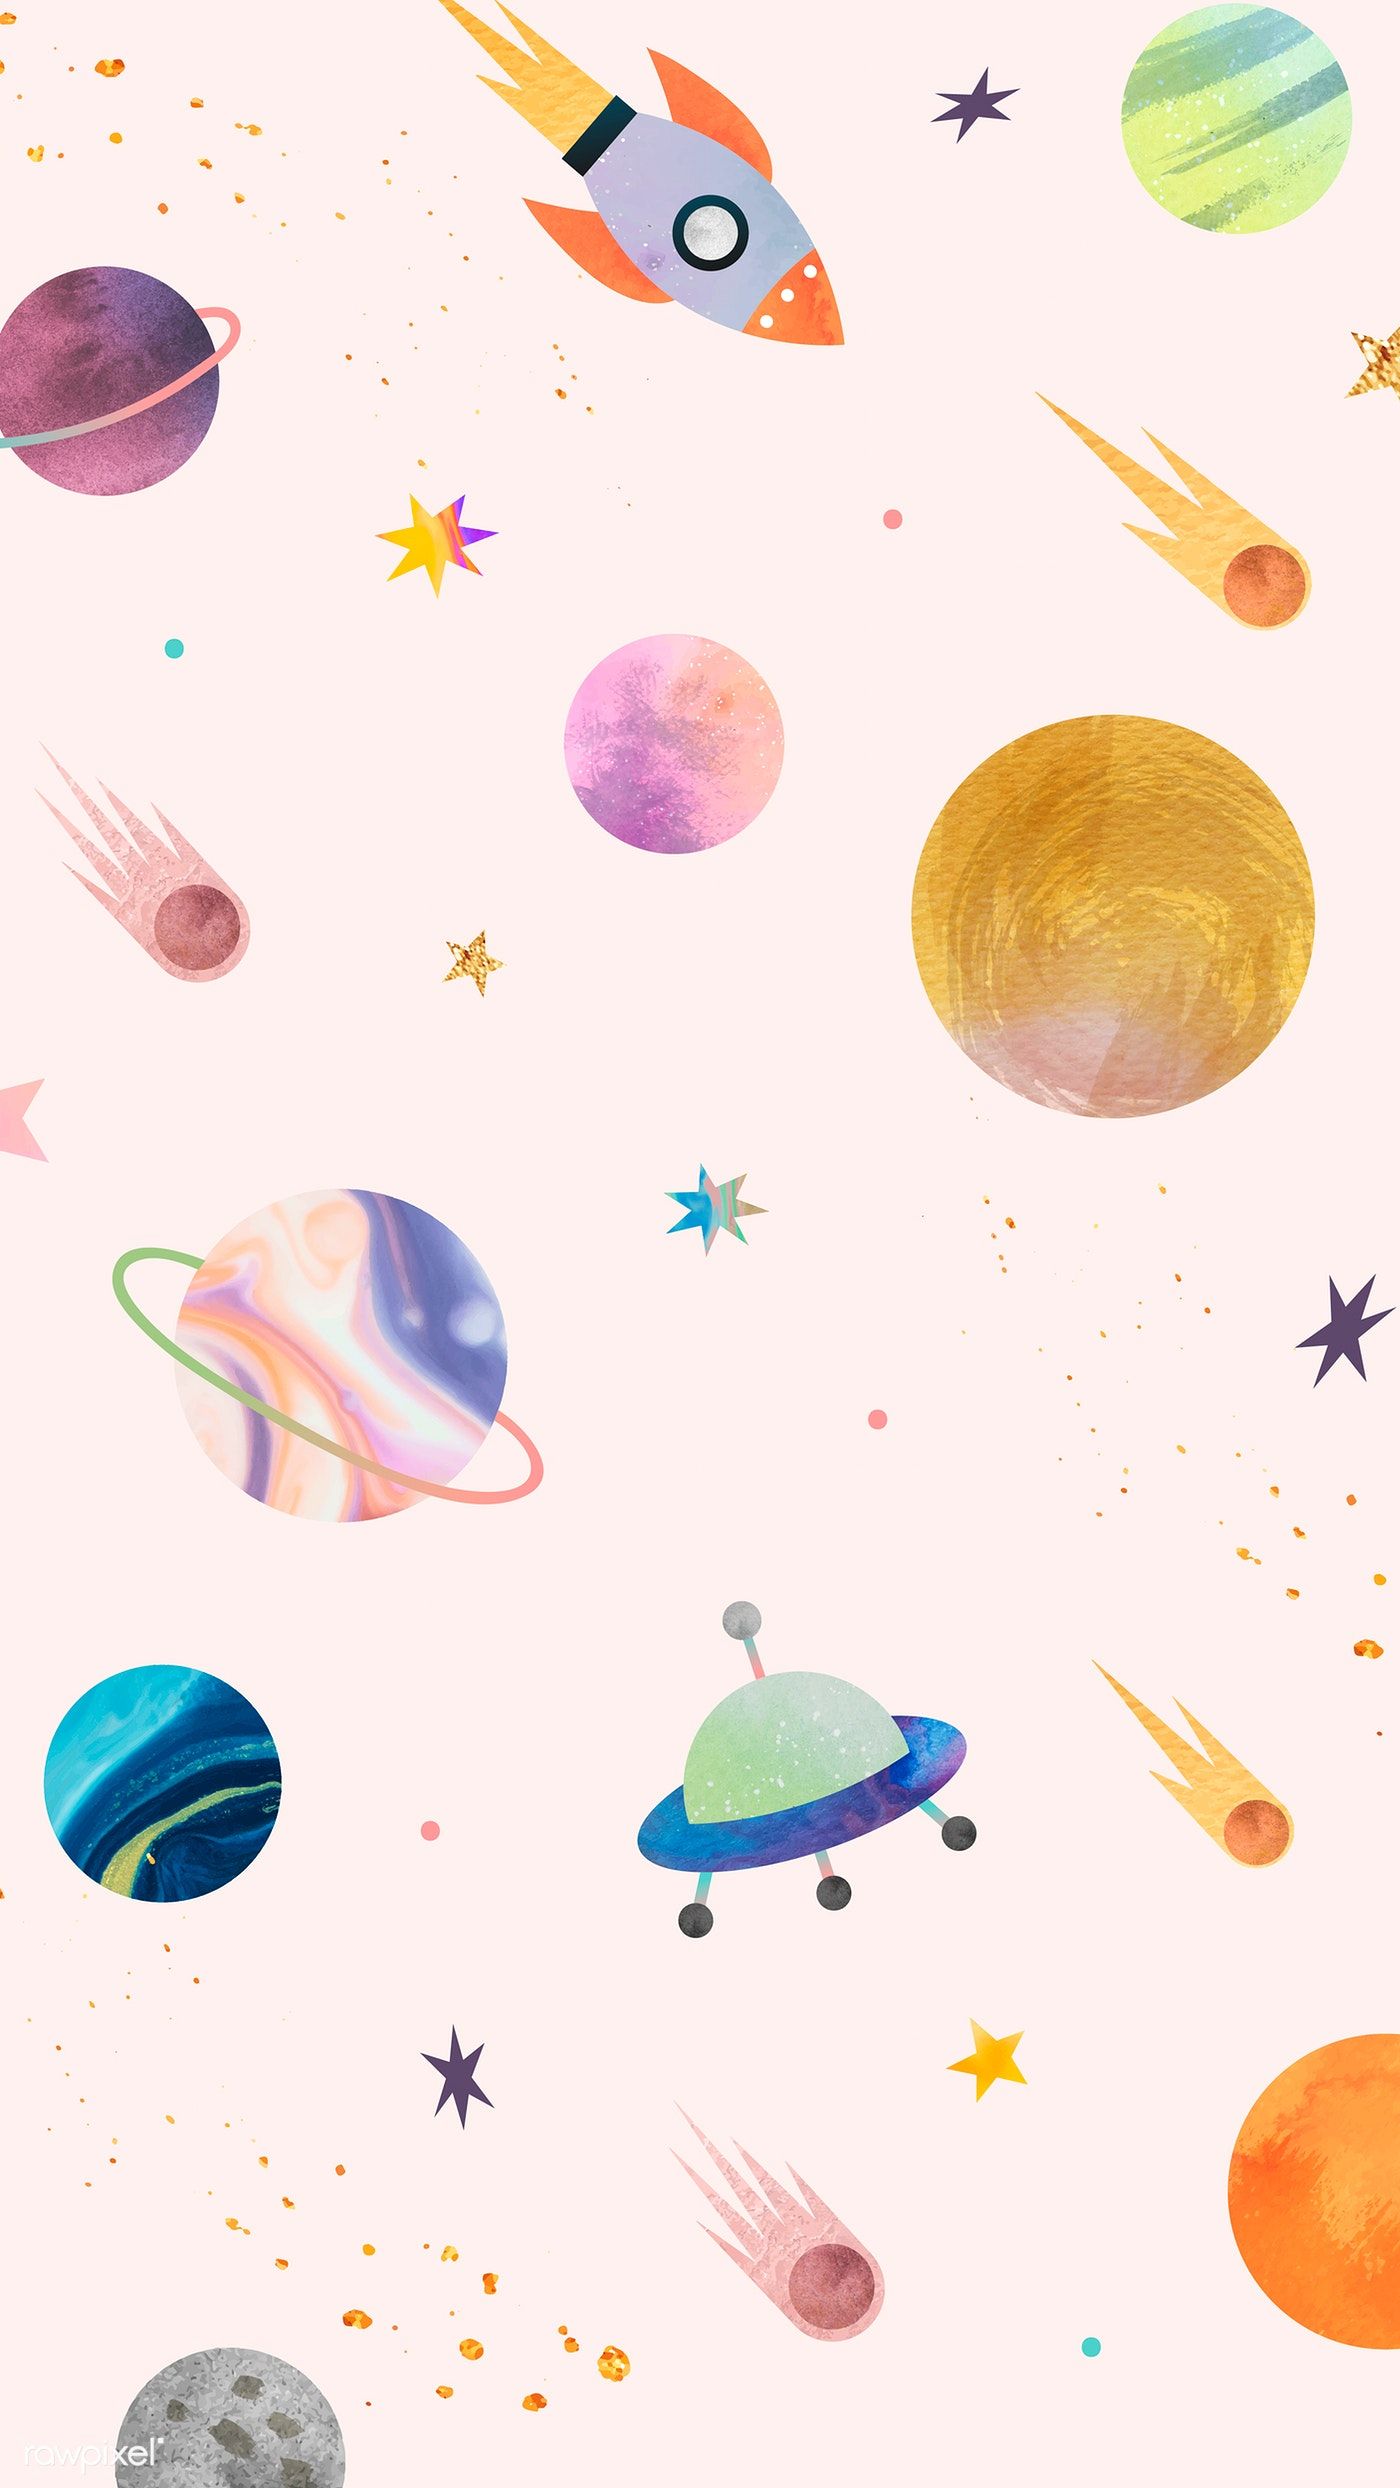 Download premium vector of Colorful galaxy watercolor doodle on pastel background mobile phone wallpaper vector by Toon about iphone wallpaper watercolor phone wallpaper pastel wallpaper phone and kids pattern 1230065